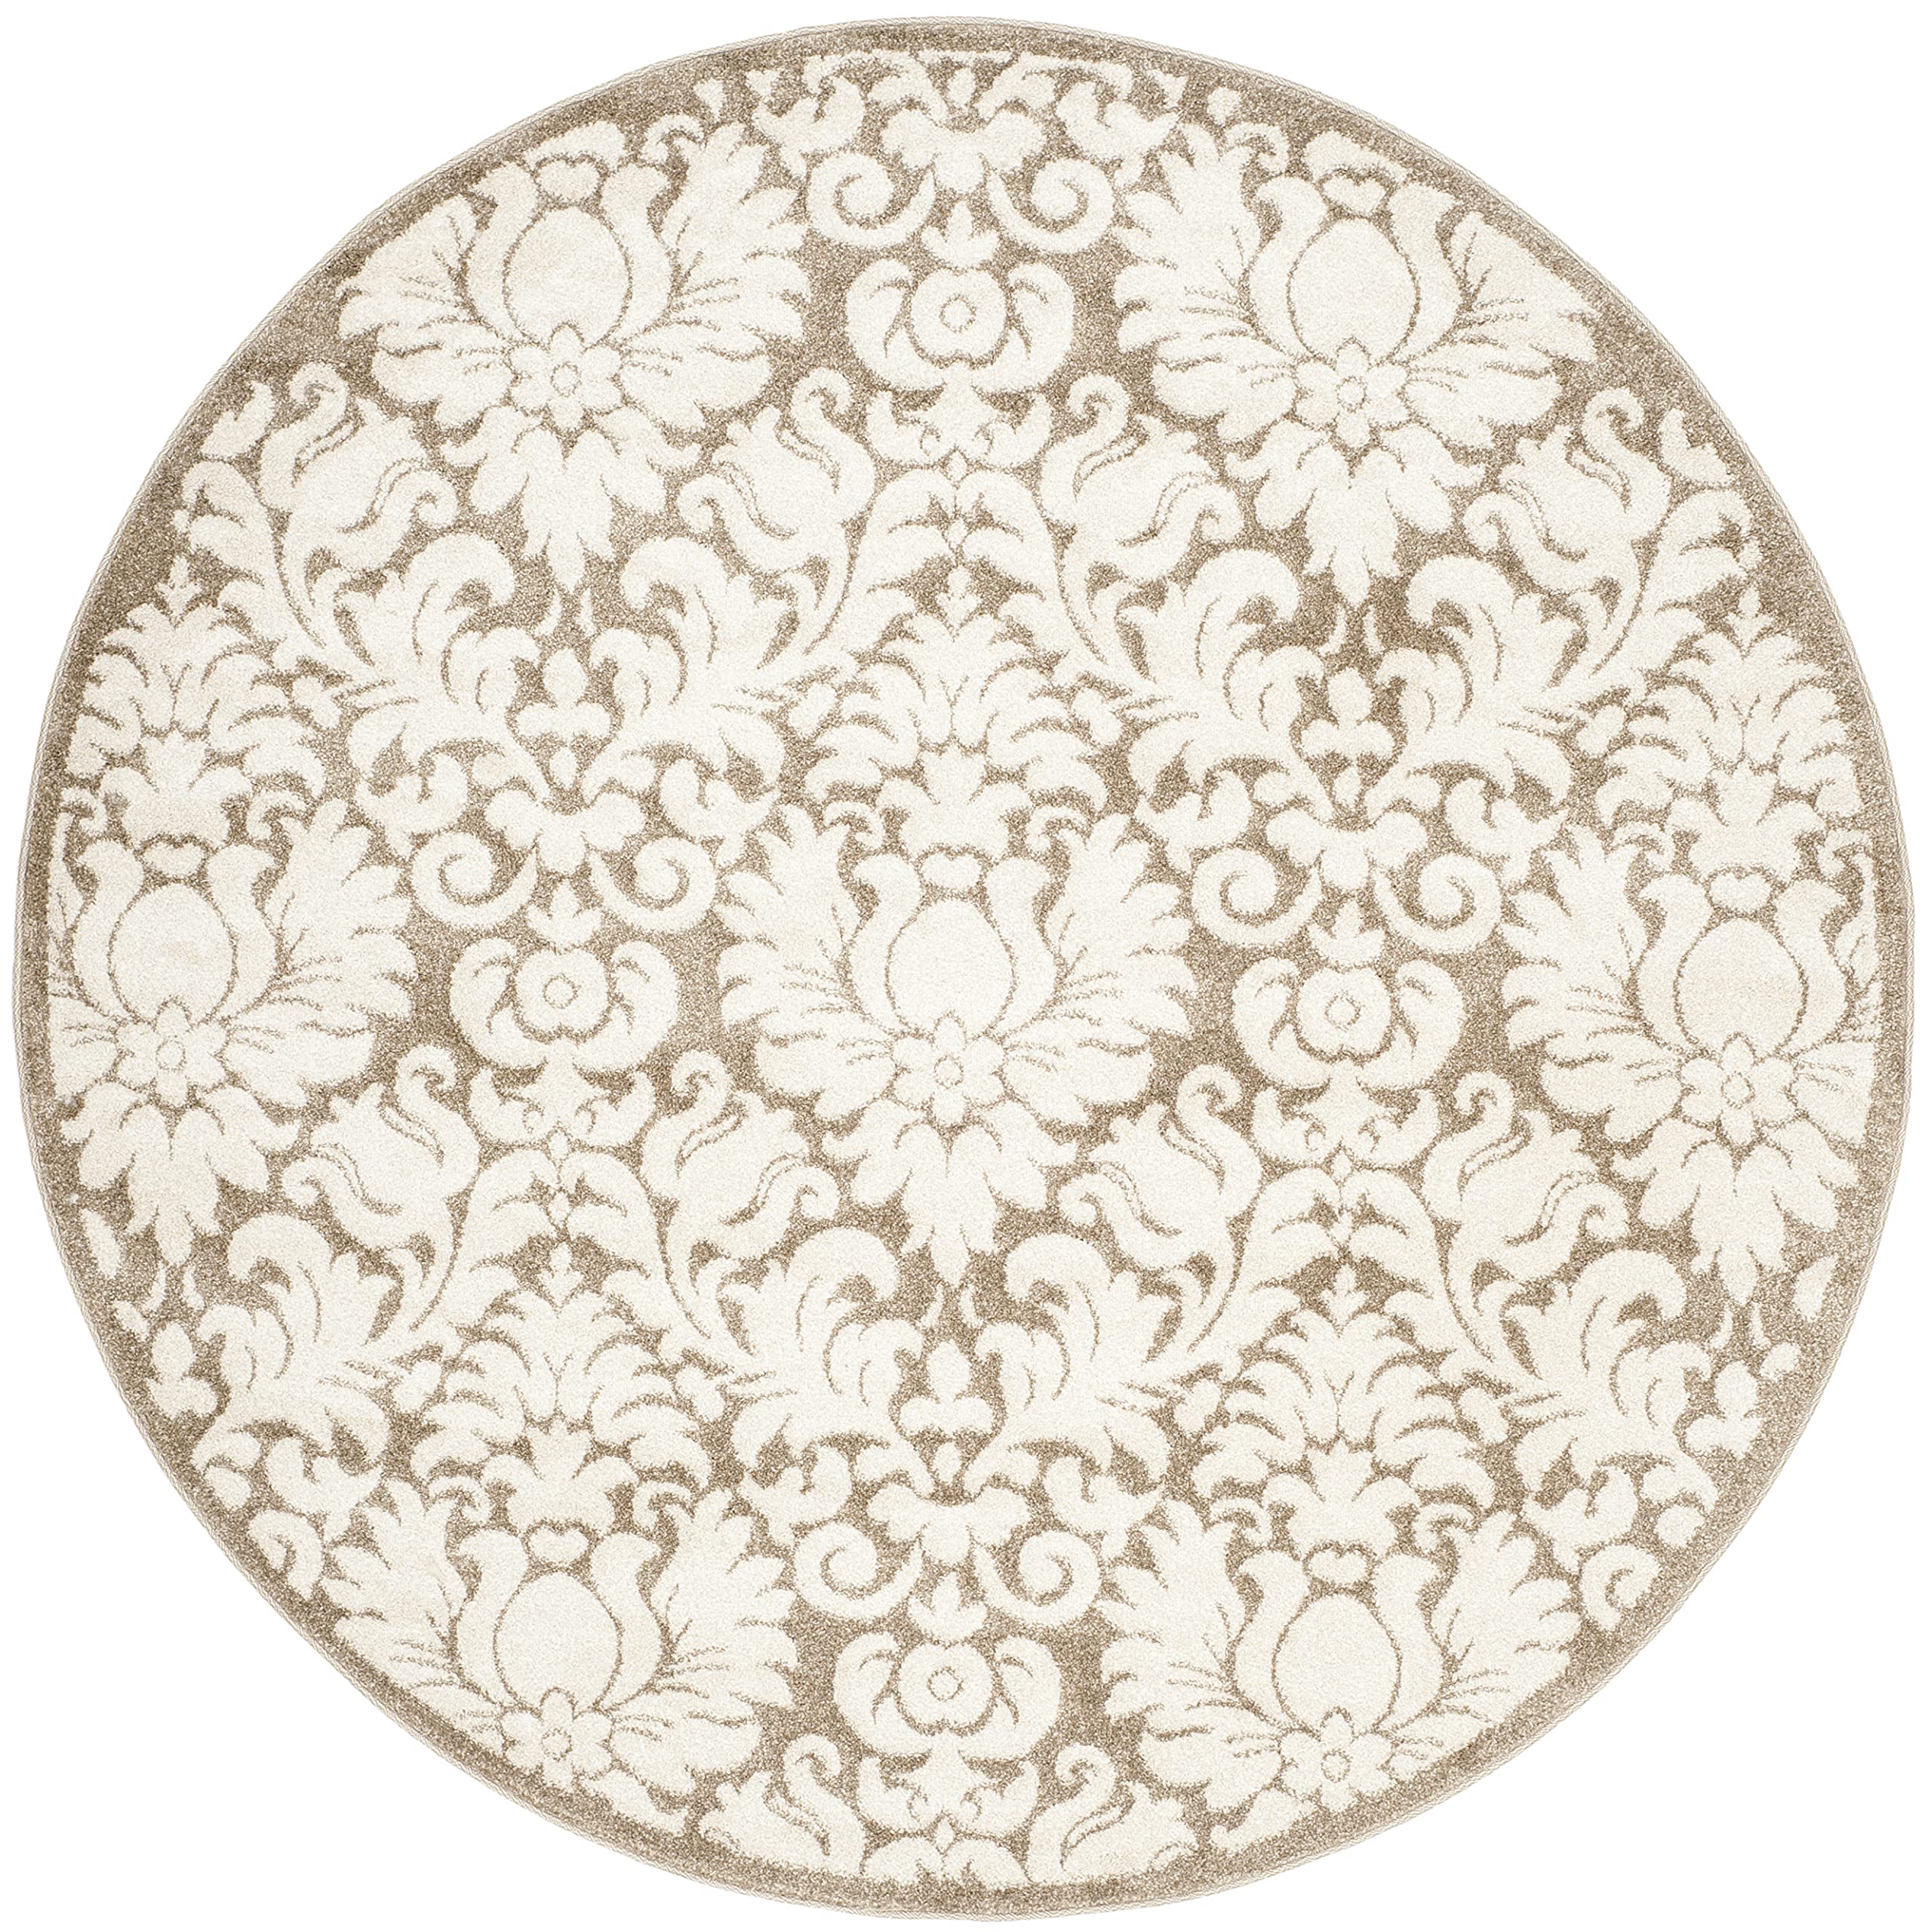 SAFAVIEH Amherst Collection 5' x 5' Round Wheat / Beige AMT427S Floral Damask Non-Shedding Dining Room Entryway Foyer Living Room Bedroom A...